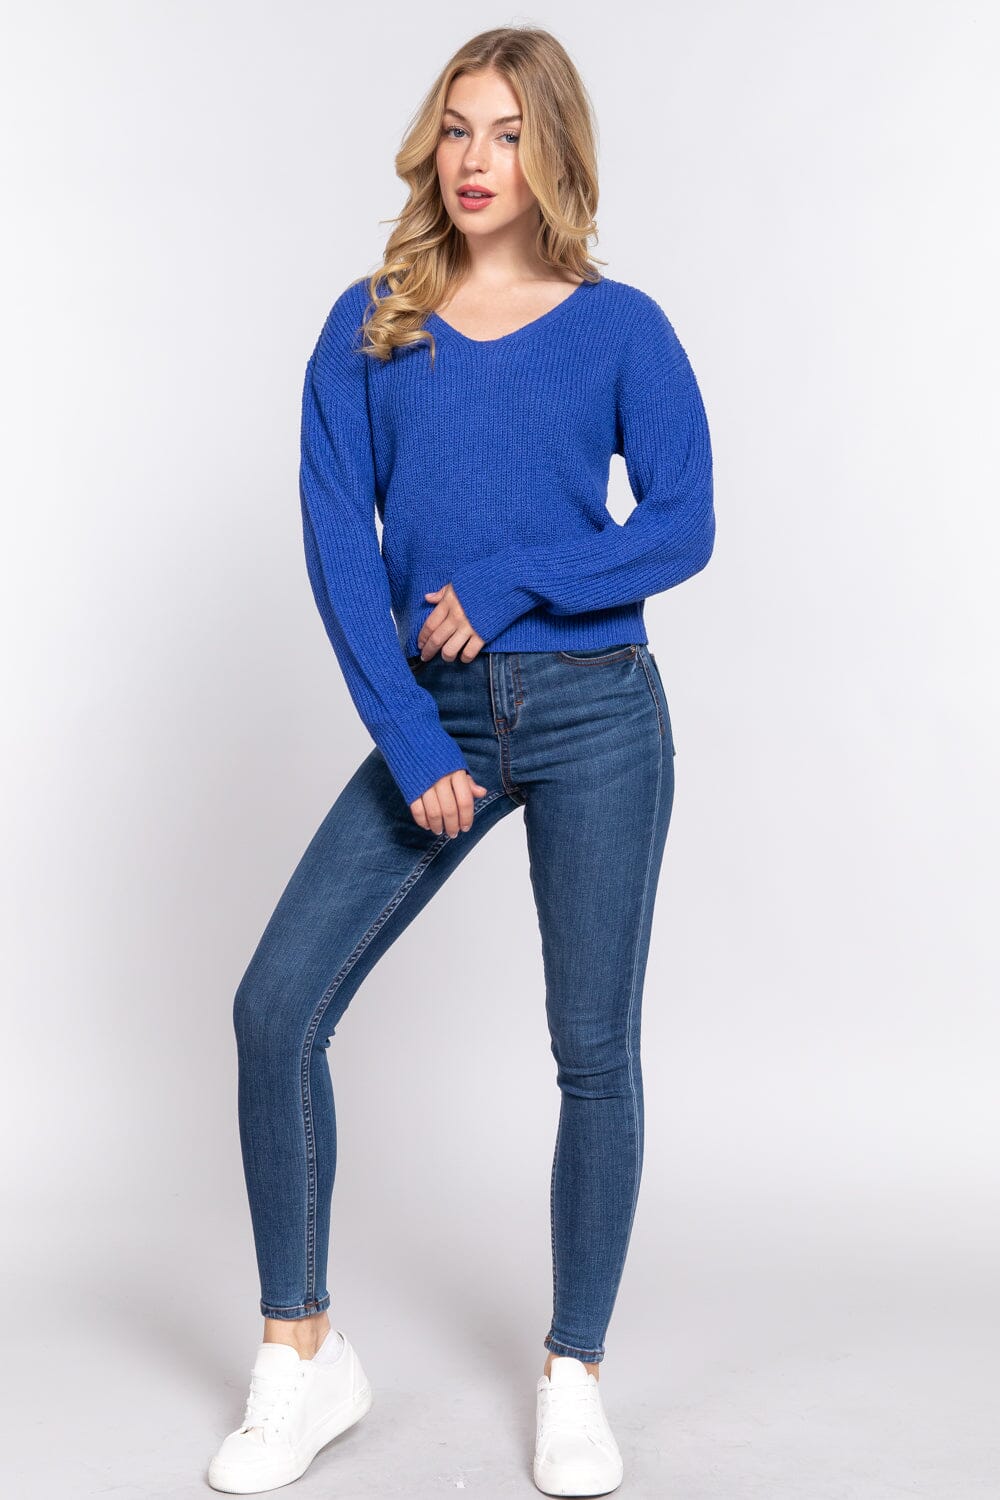 Blue Dolman Long Sleeve Strappy Open Back Sweater Top Shirts & Tops jehouze S 